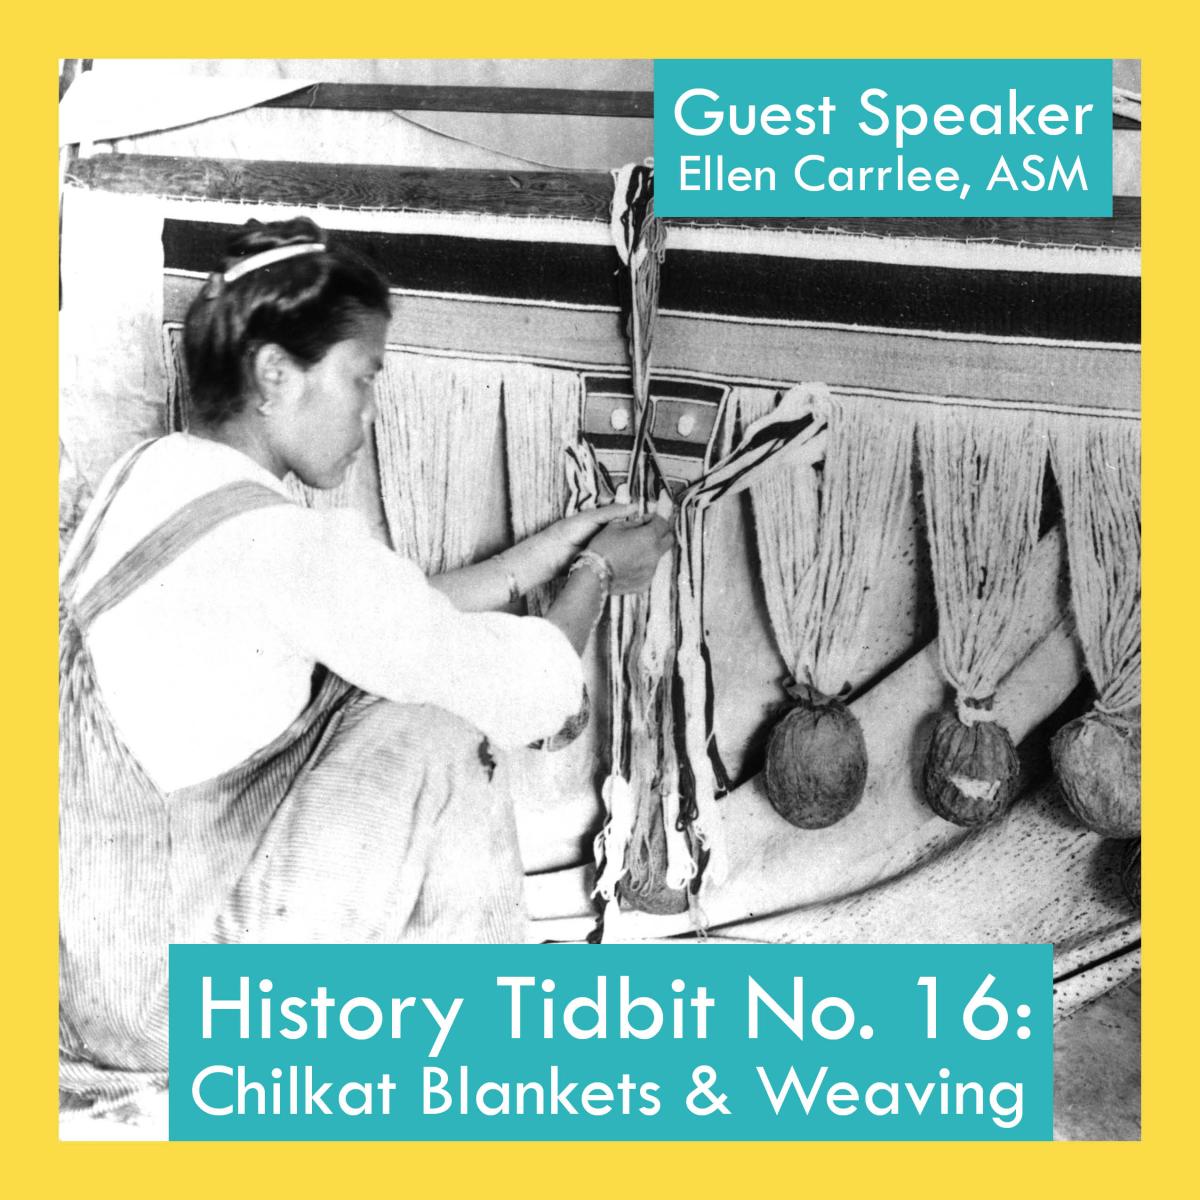 Chilkat Blankets and Weaving